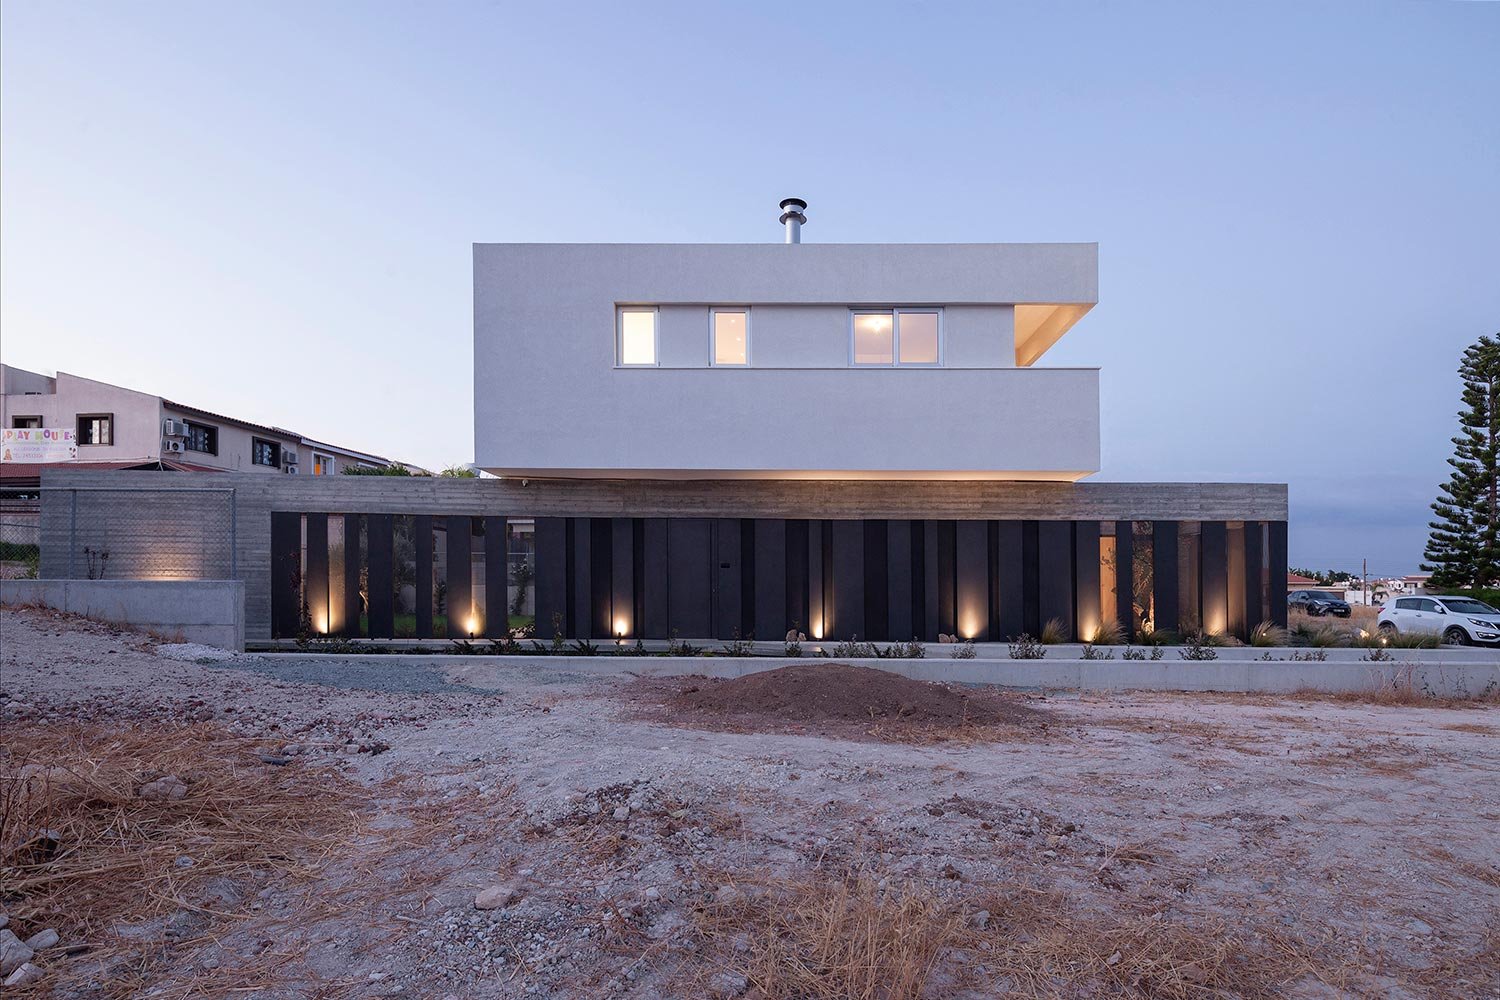 Modern house with board form concrete walls, aluminium cladding and white render volume on top